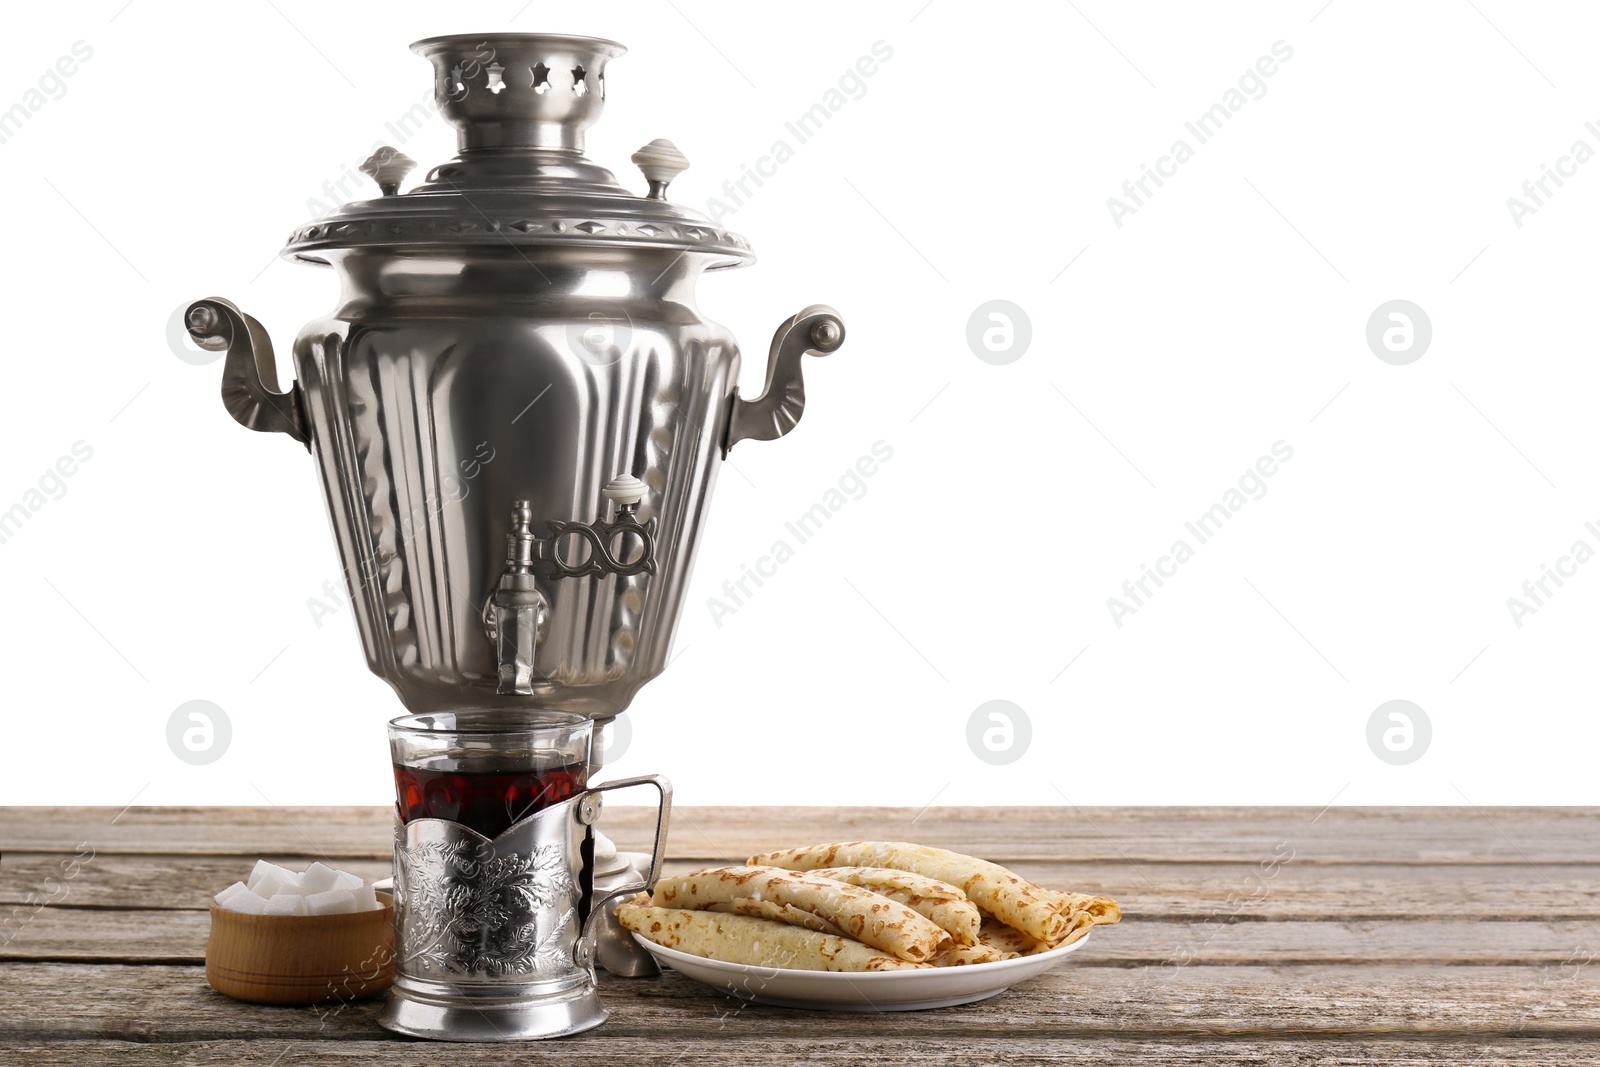 Photo of Vintage samovar, cup of hot drink and snacks on wooden table against white background, space for text. Traditional Russian tea ceremony